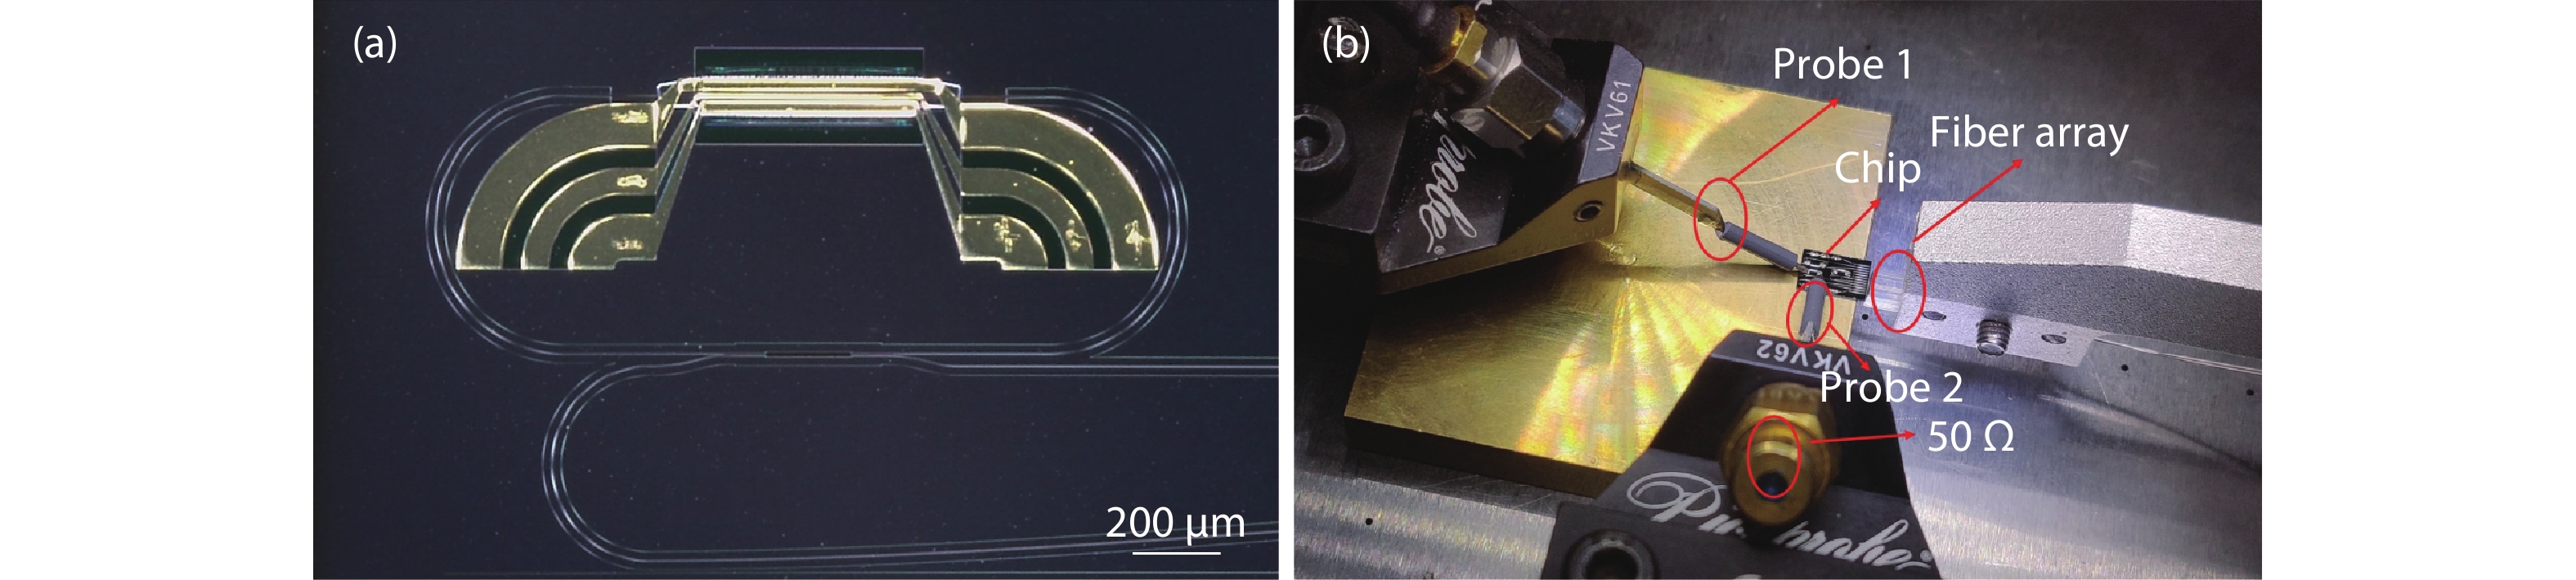 (Color online) (a) A photograph of the microring modulator with a scale bar of 200 μm. (b) A photograph of the chip coupled to the fiber array and probes for experimental test.